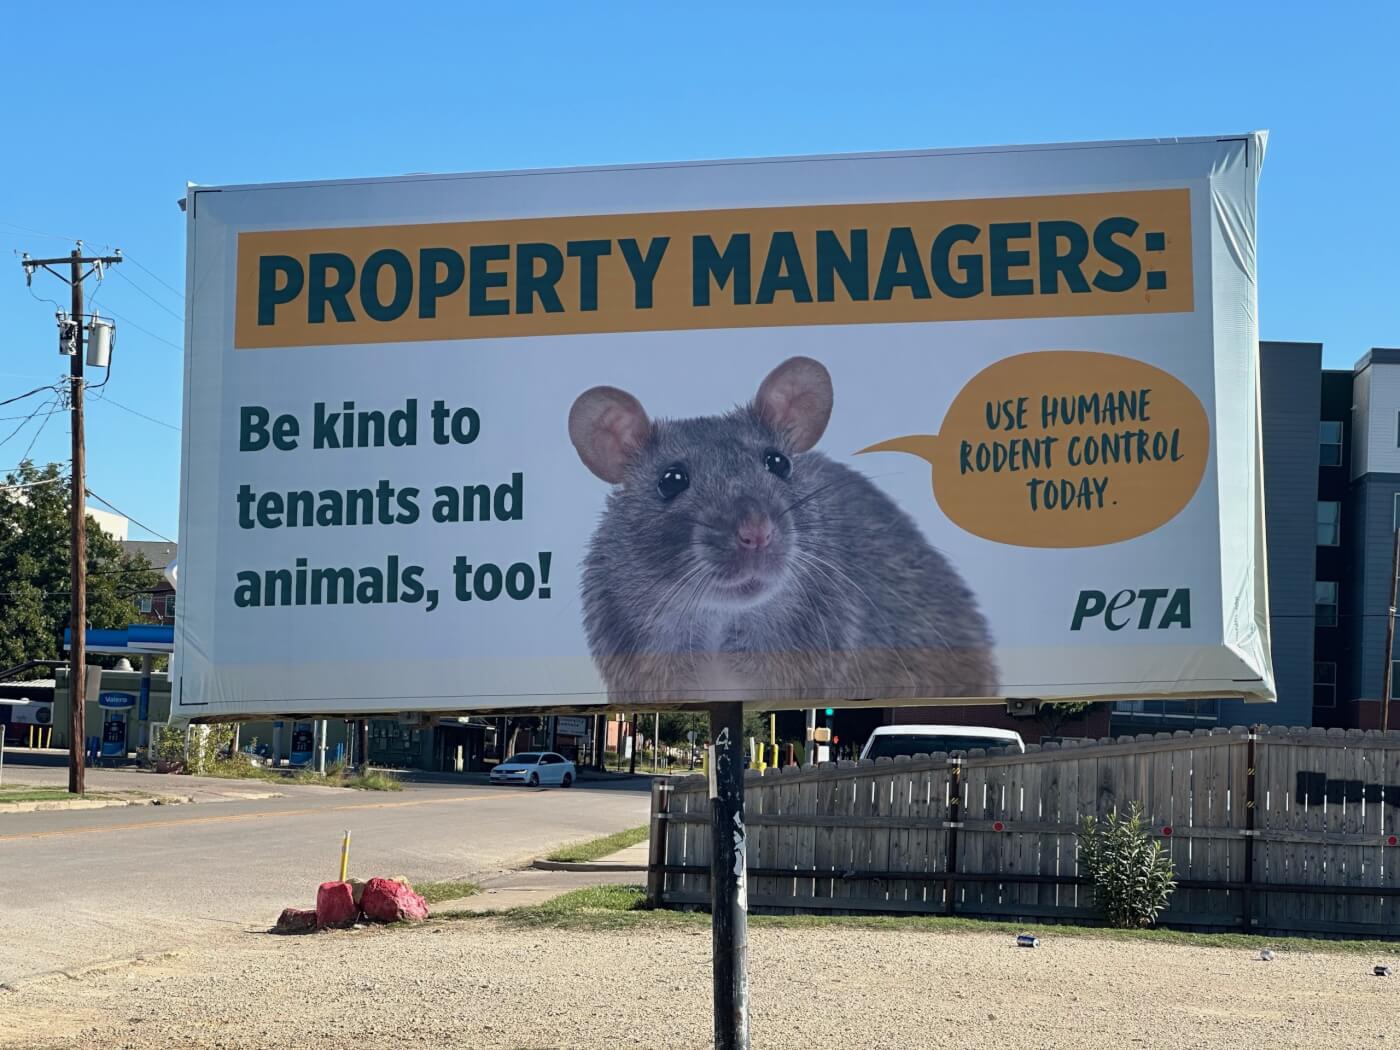 Photo of humane rodent control billboard with text reading property managers be kind to tenants and animals too, use humane rodent control today